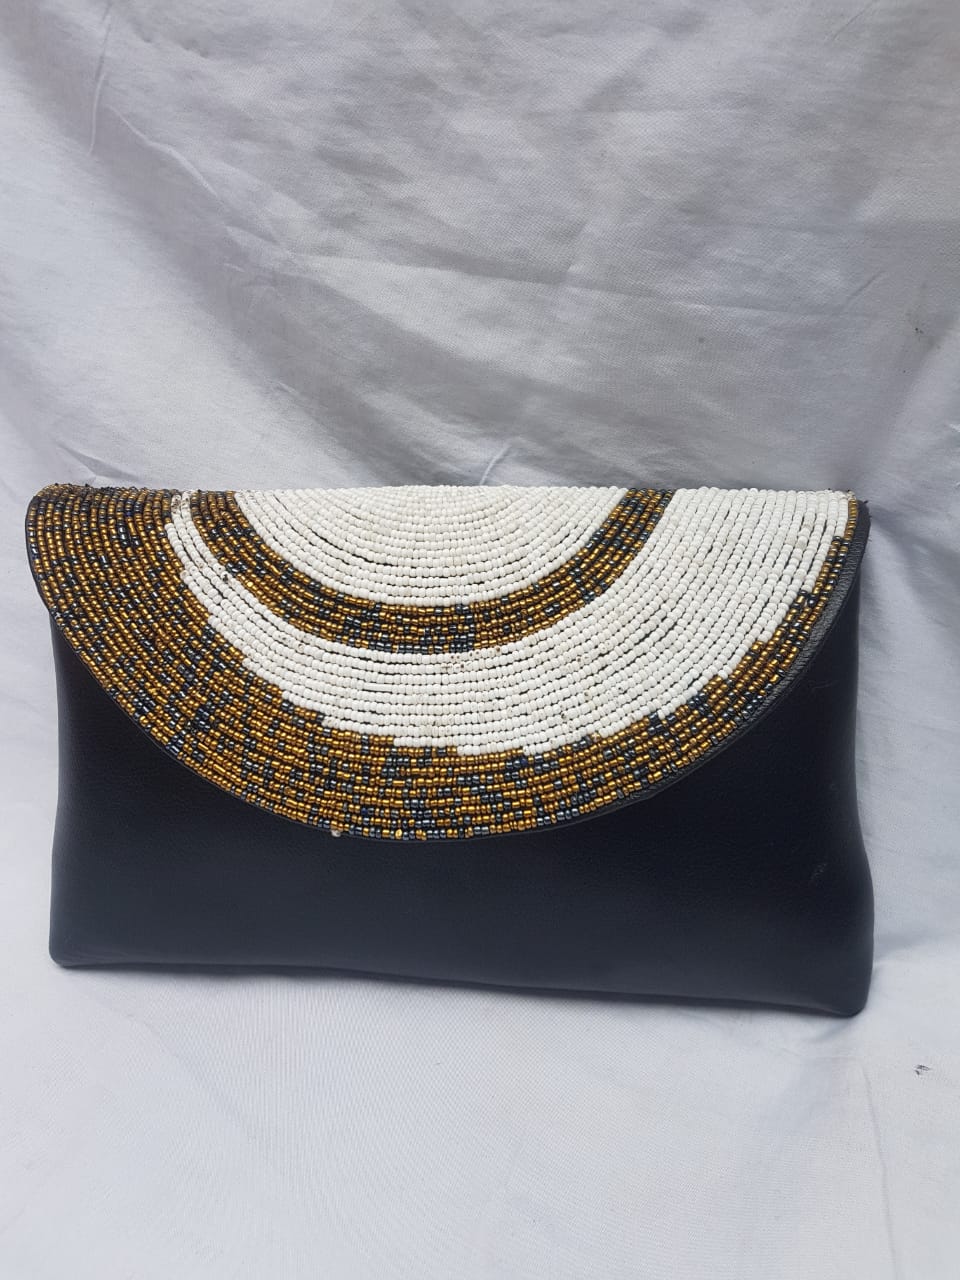 Black leather clutch purse decorated with white and brown beads.